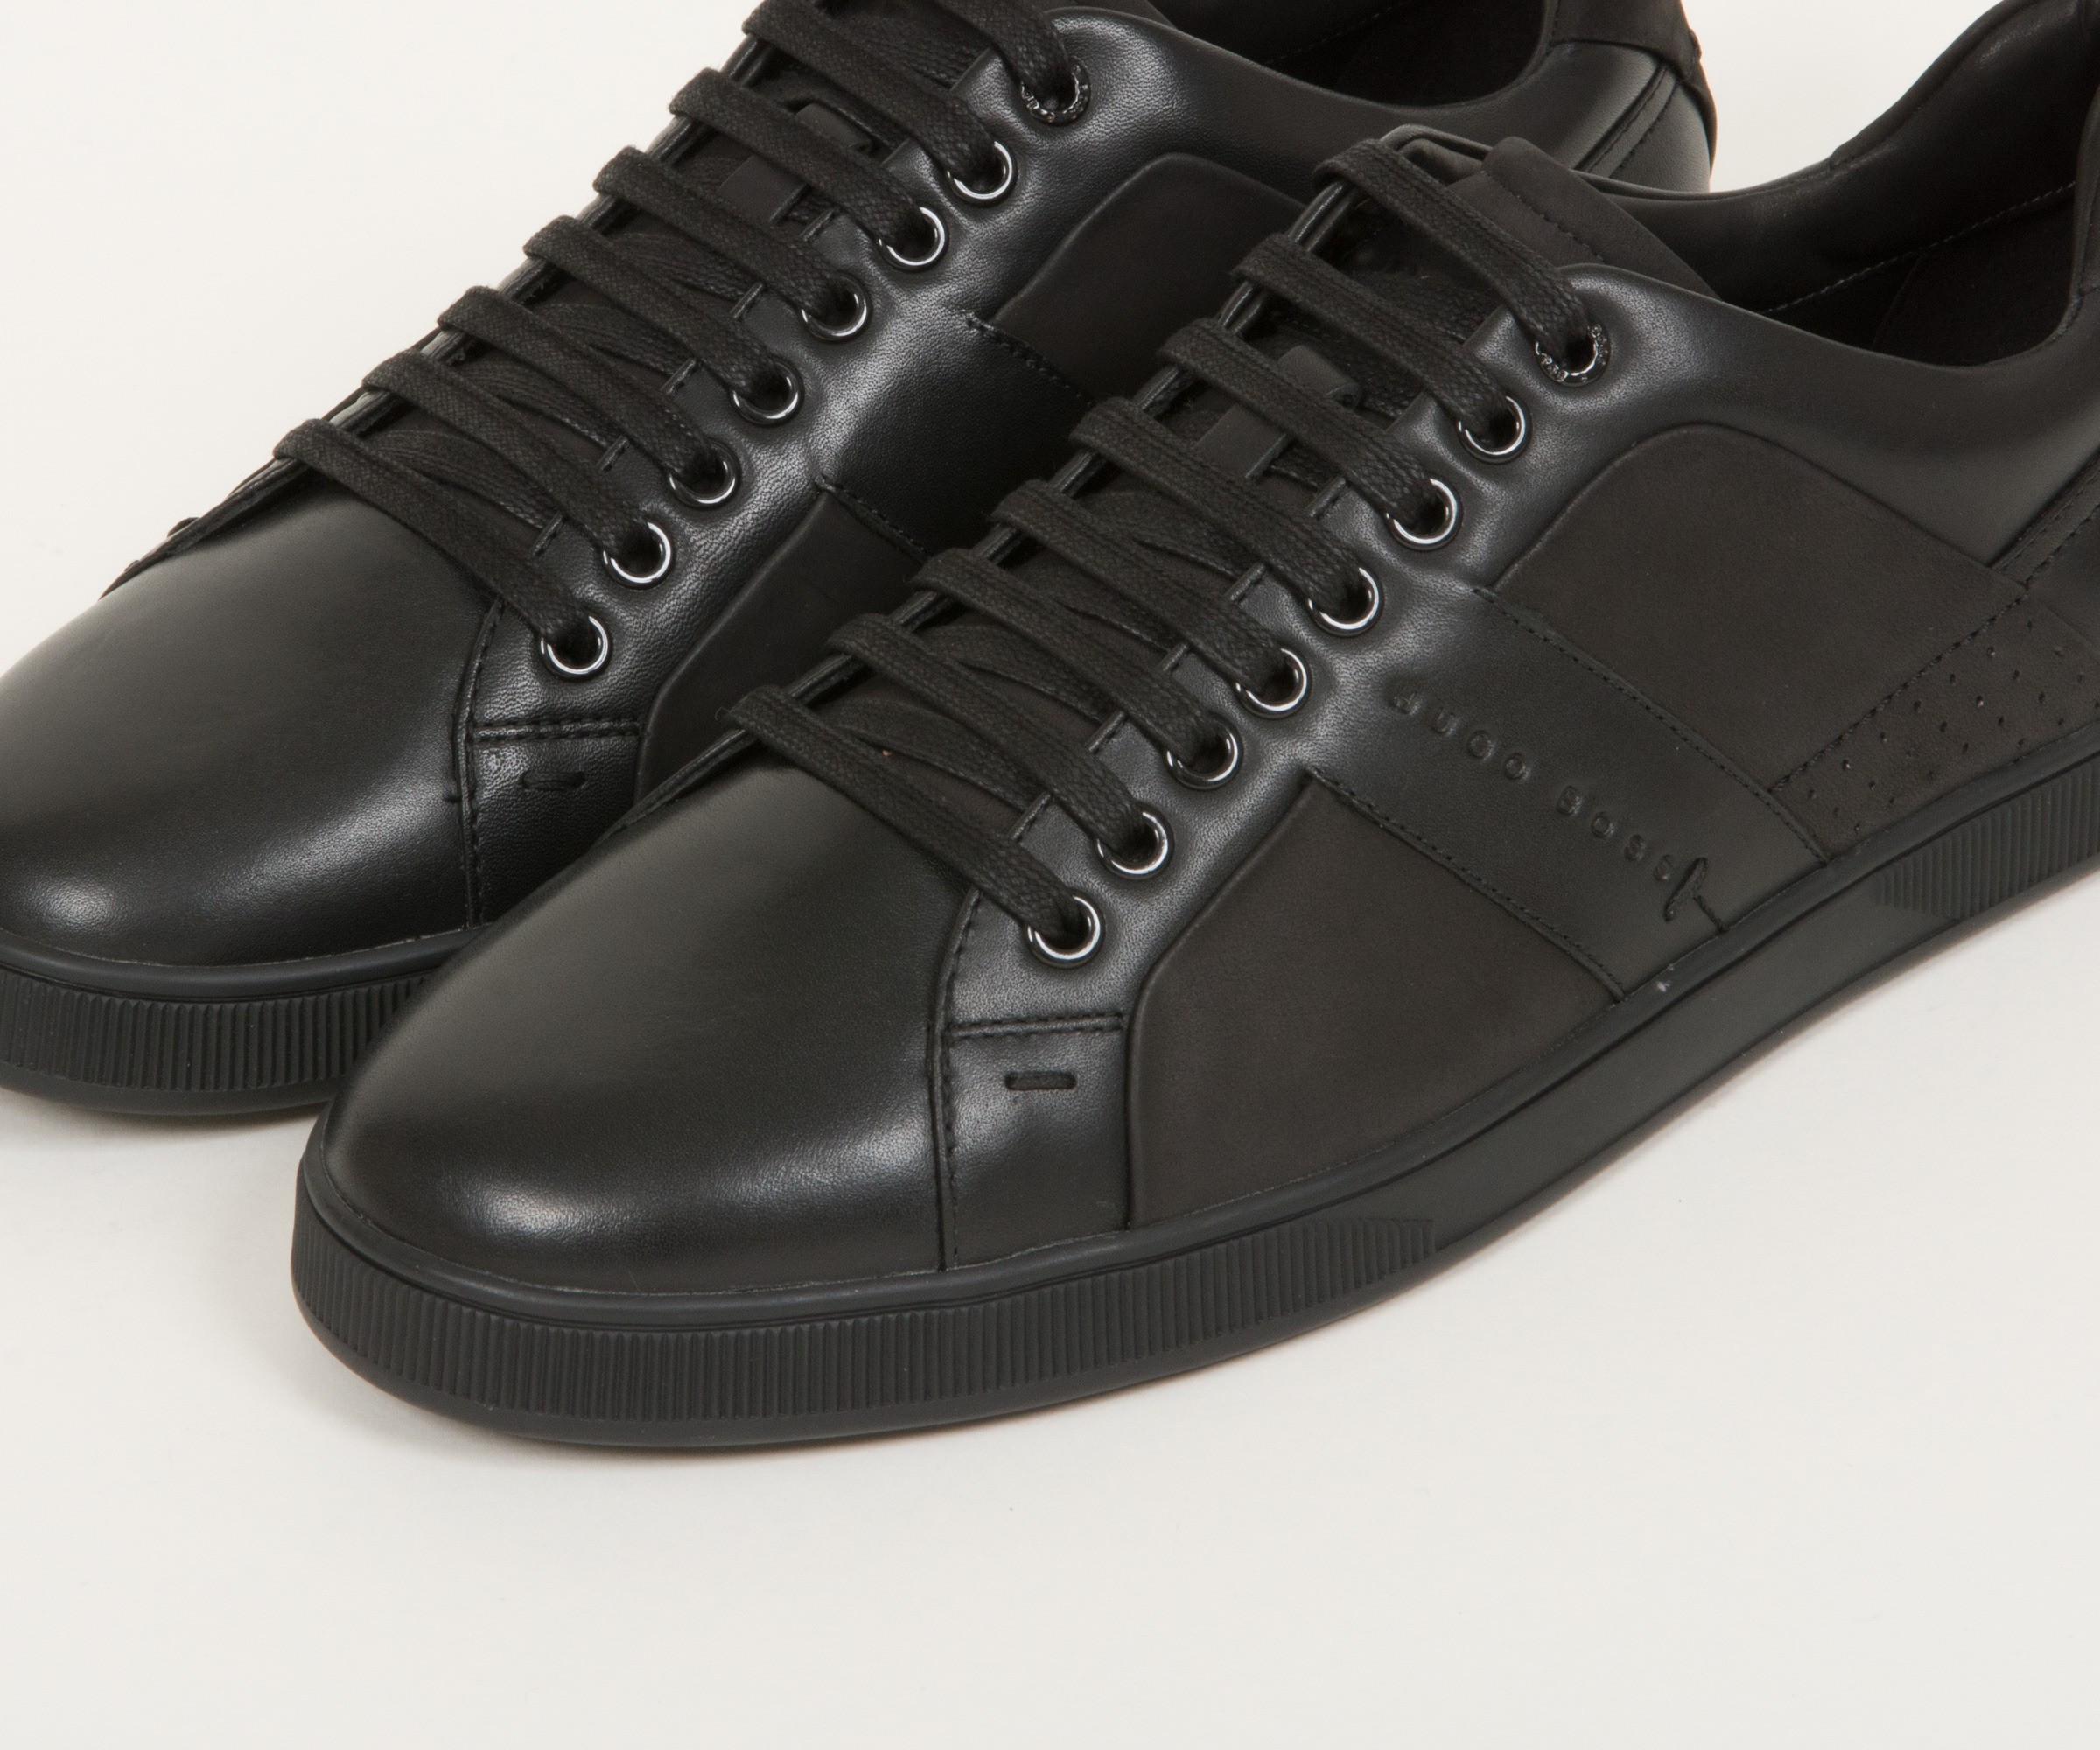 Hugo Boss 'Acros' Leather Sneakers With Textile Inserts Black (Minor Damage)